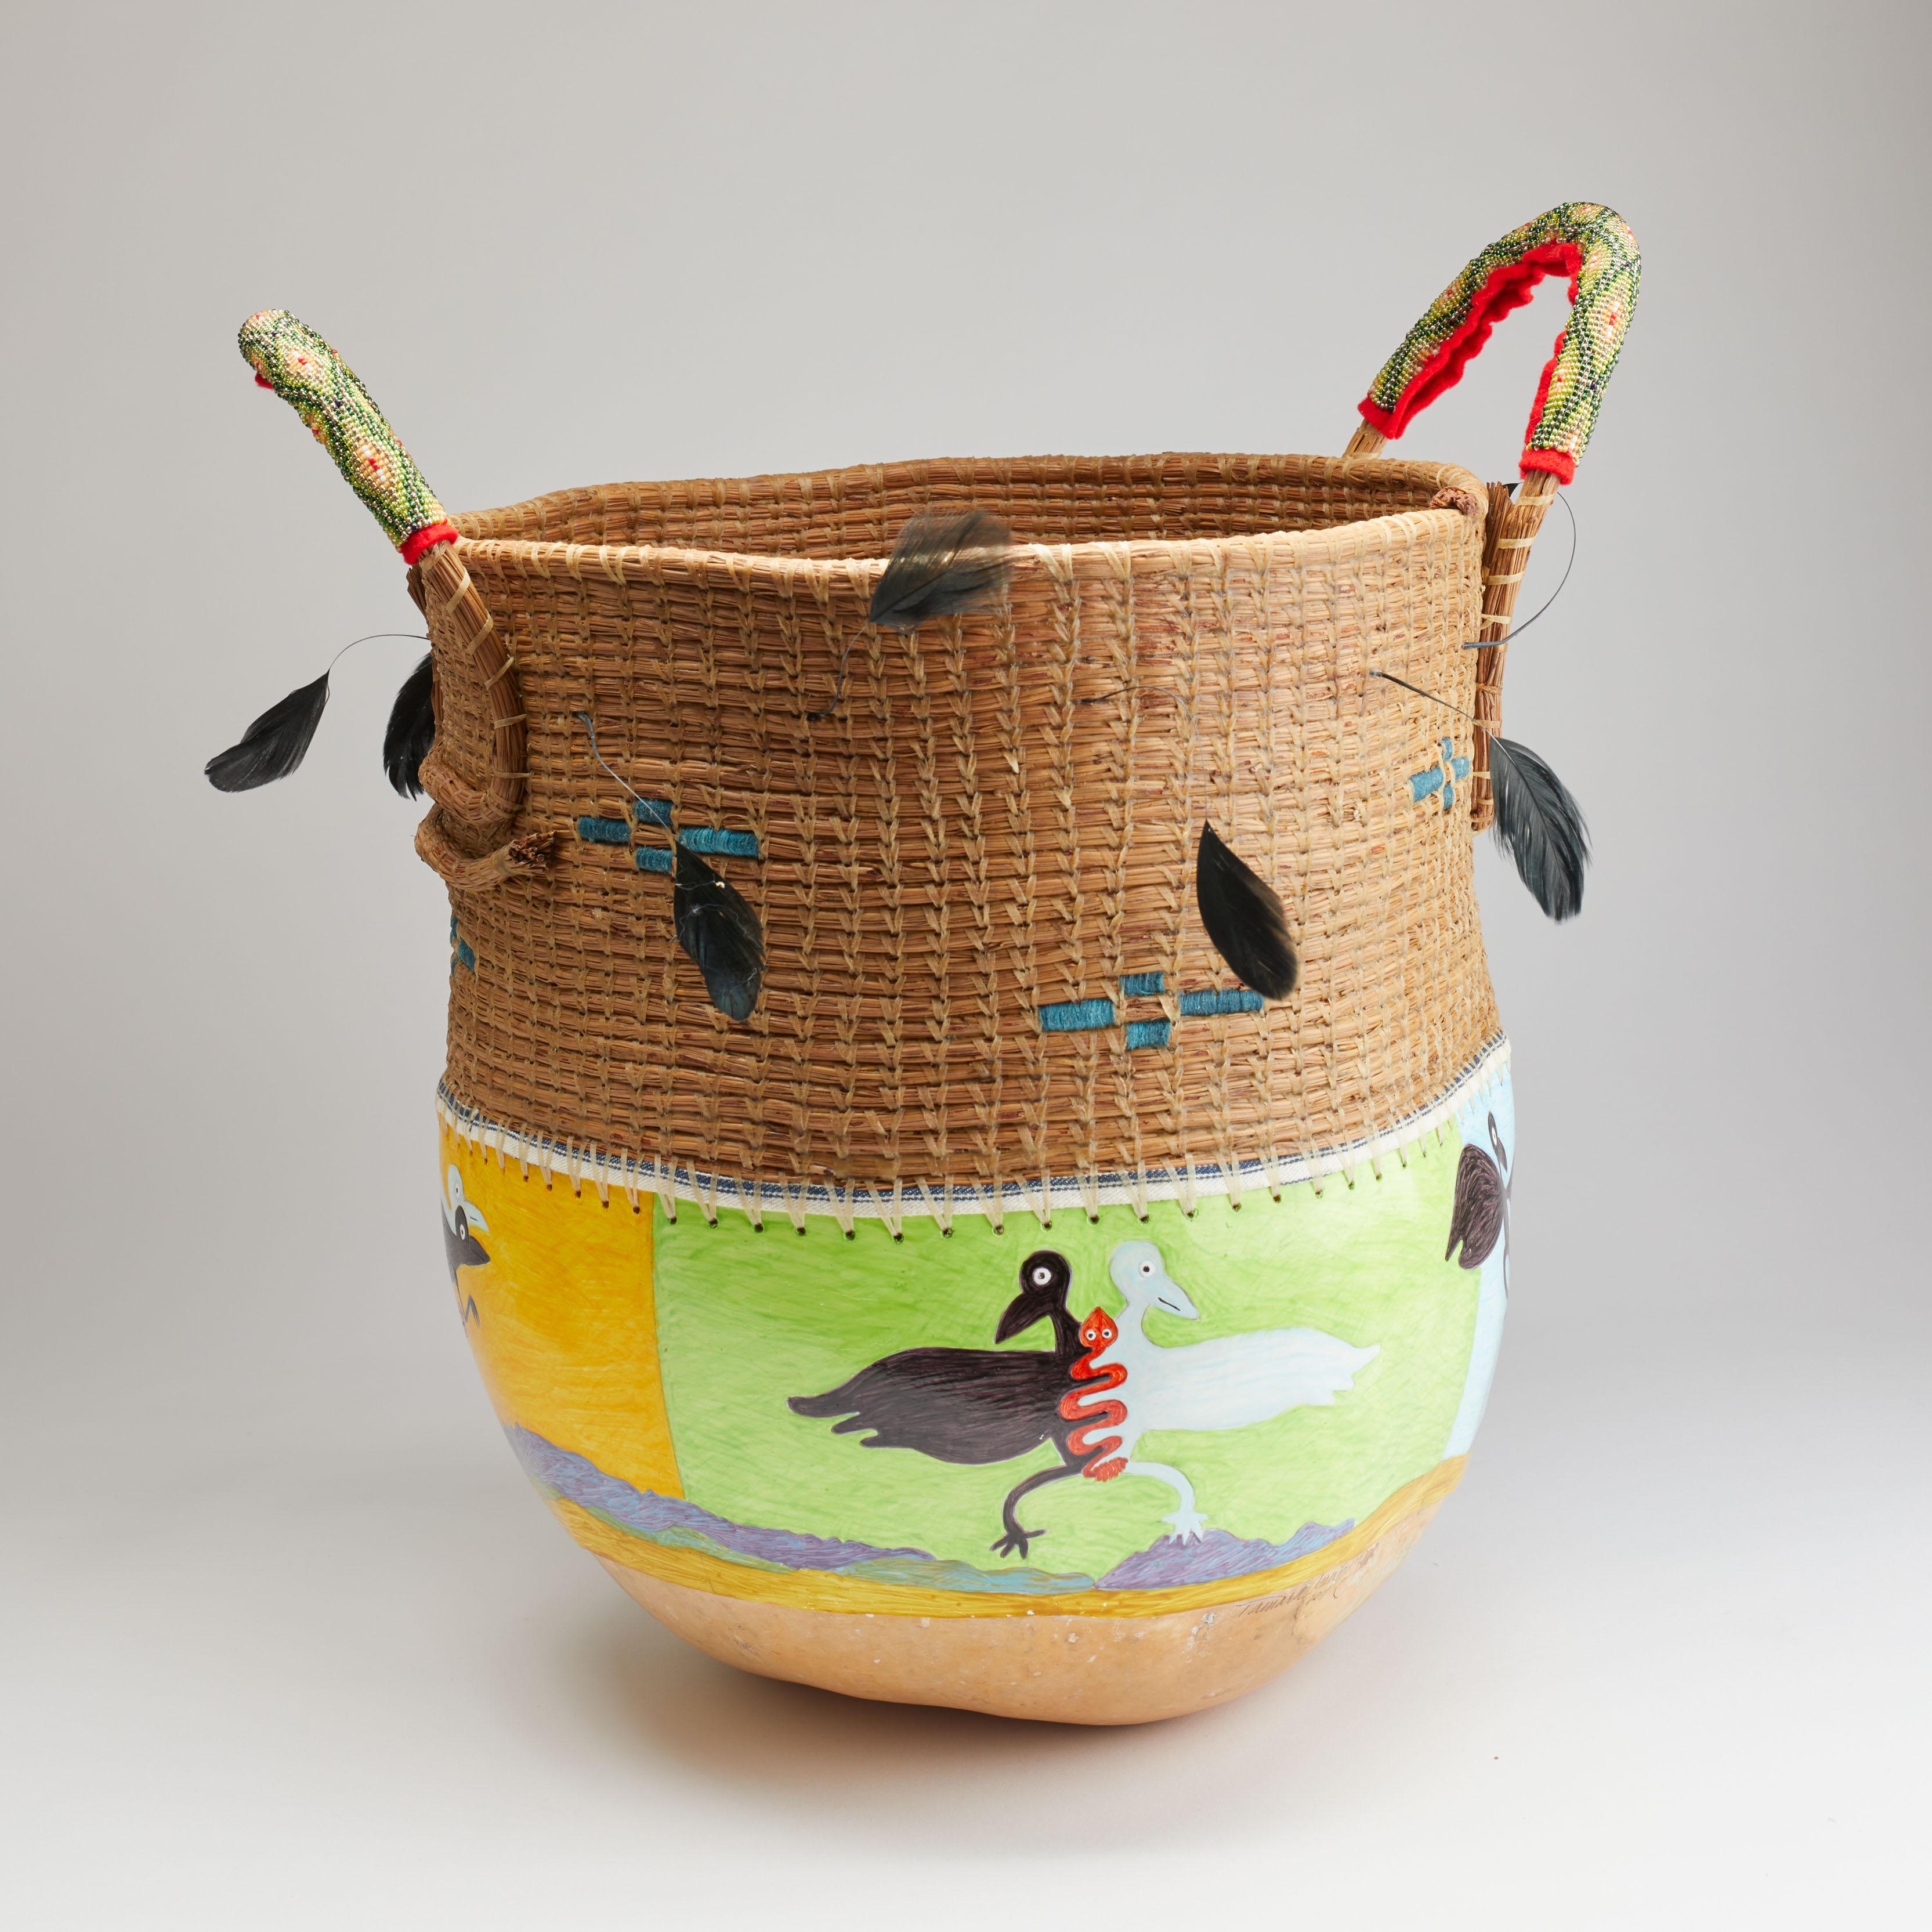 Gourd pot sculpture made of traditional materials of pine needles with beeswax sealant, gourd lined with pine sap, oil paint on applied primed canvas, cotton cloth, feathers, loom beading.